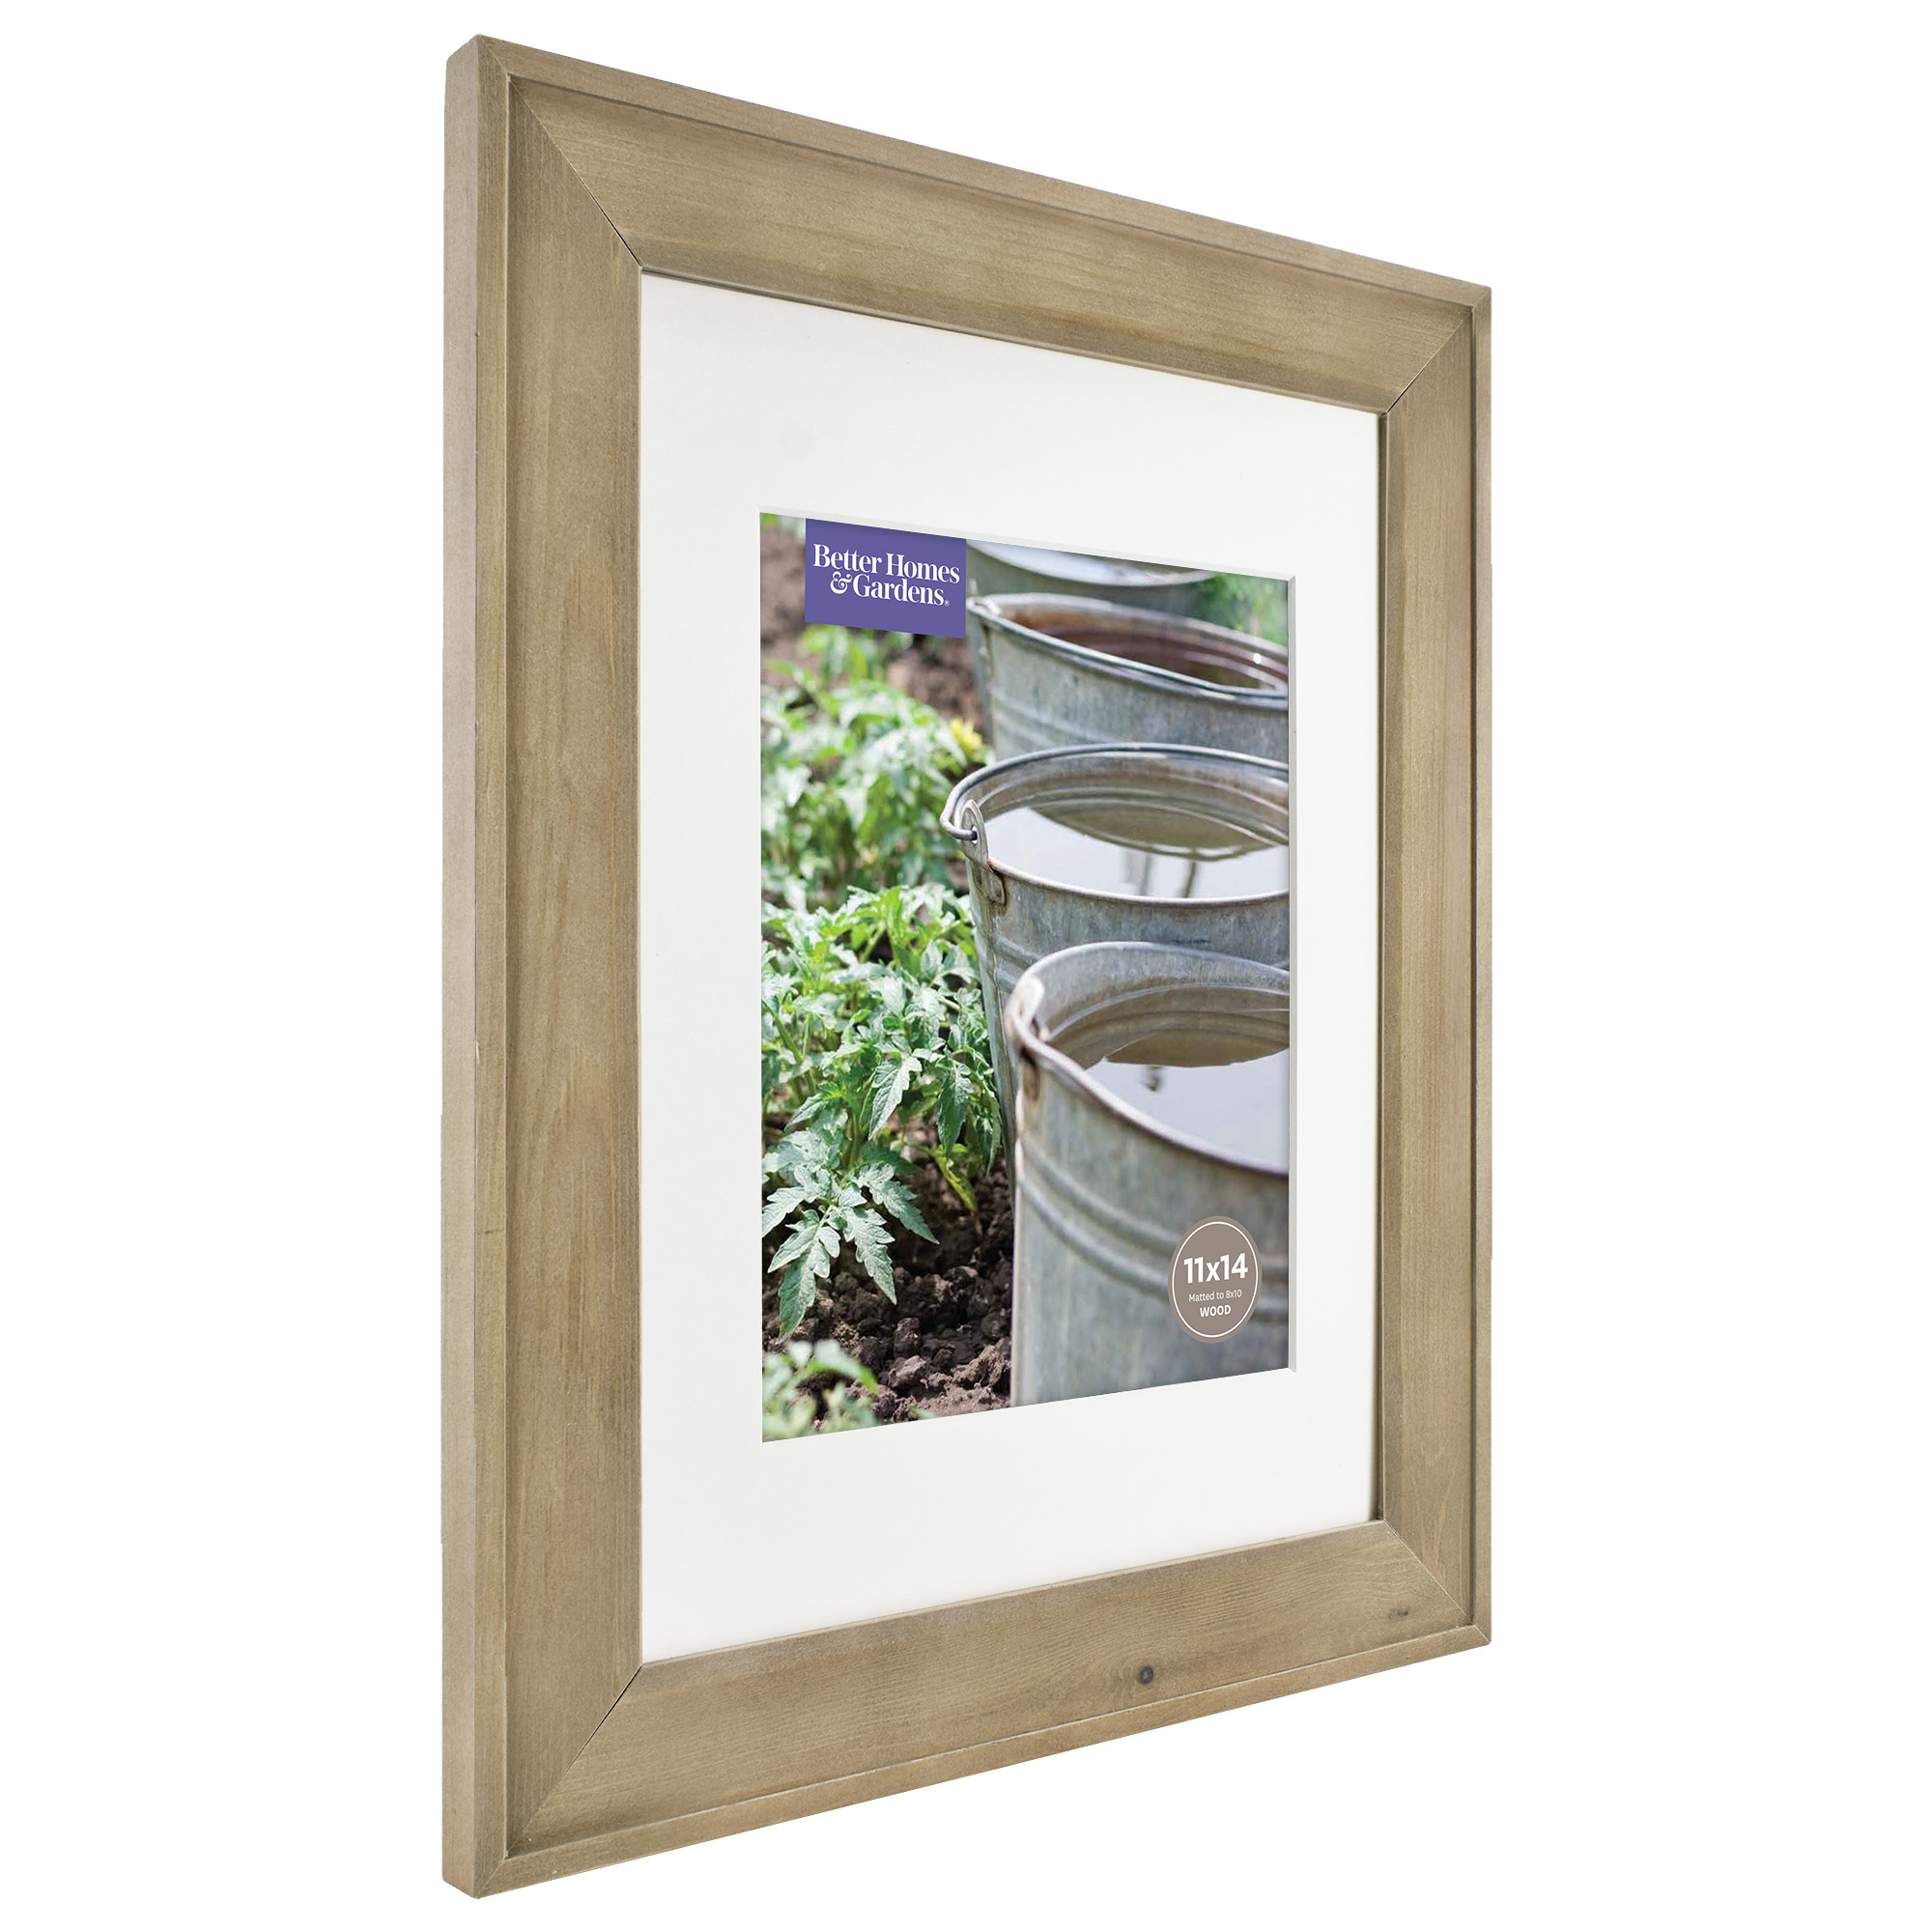 Better Homes & Gardens 11x14/8x10 Rustic Wood Picture Frame, 2pk - image 2 of 5